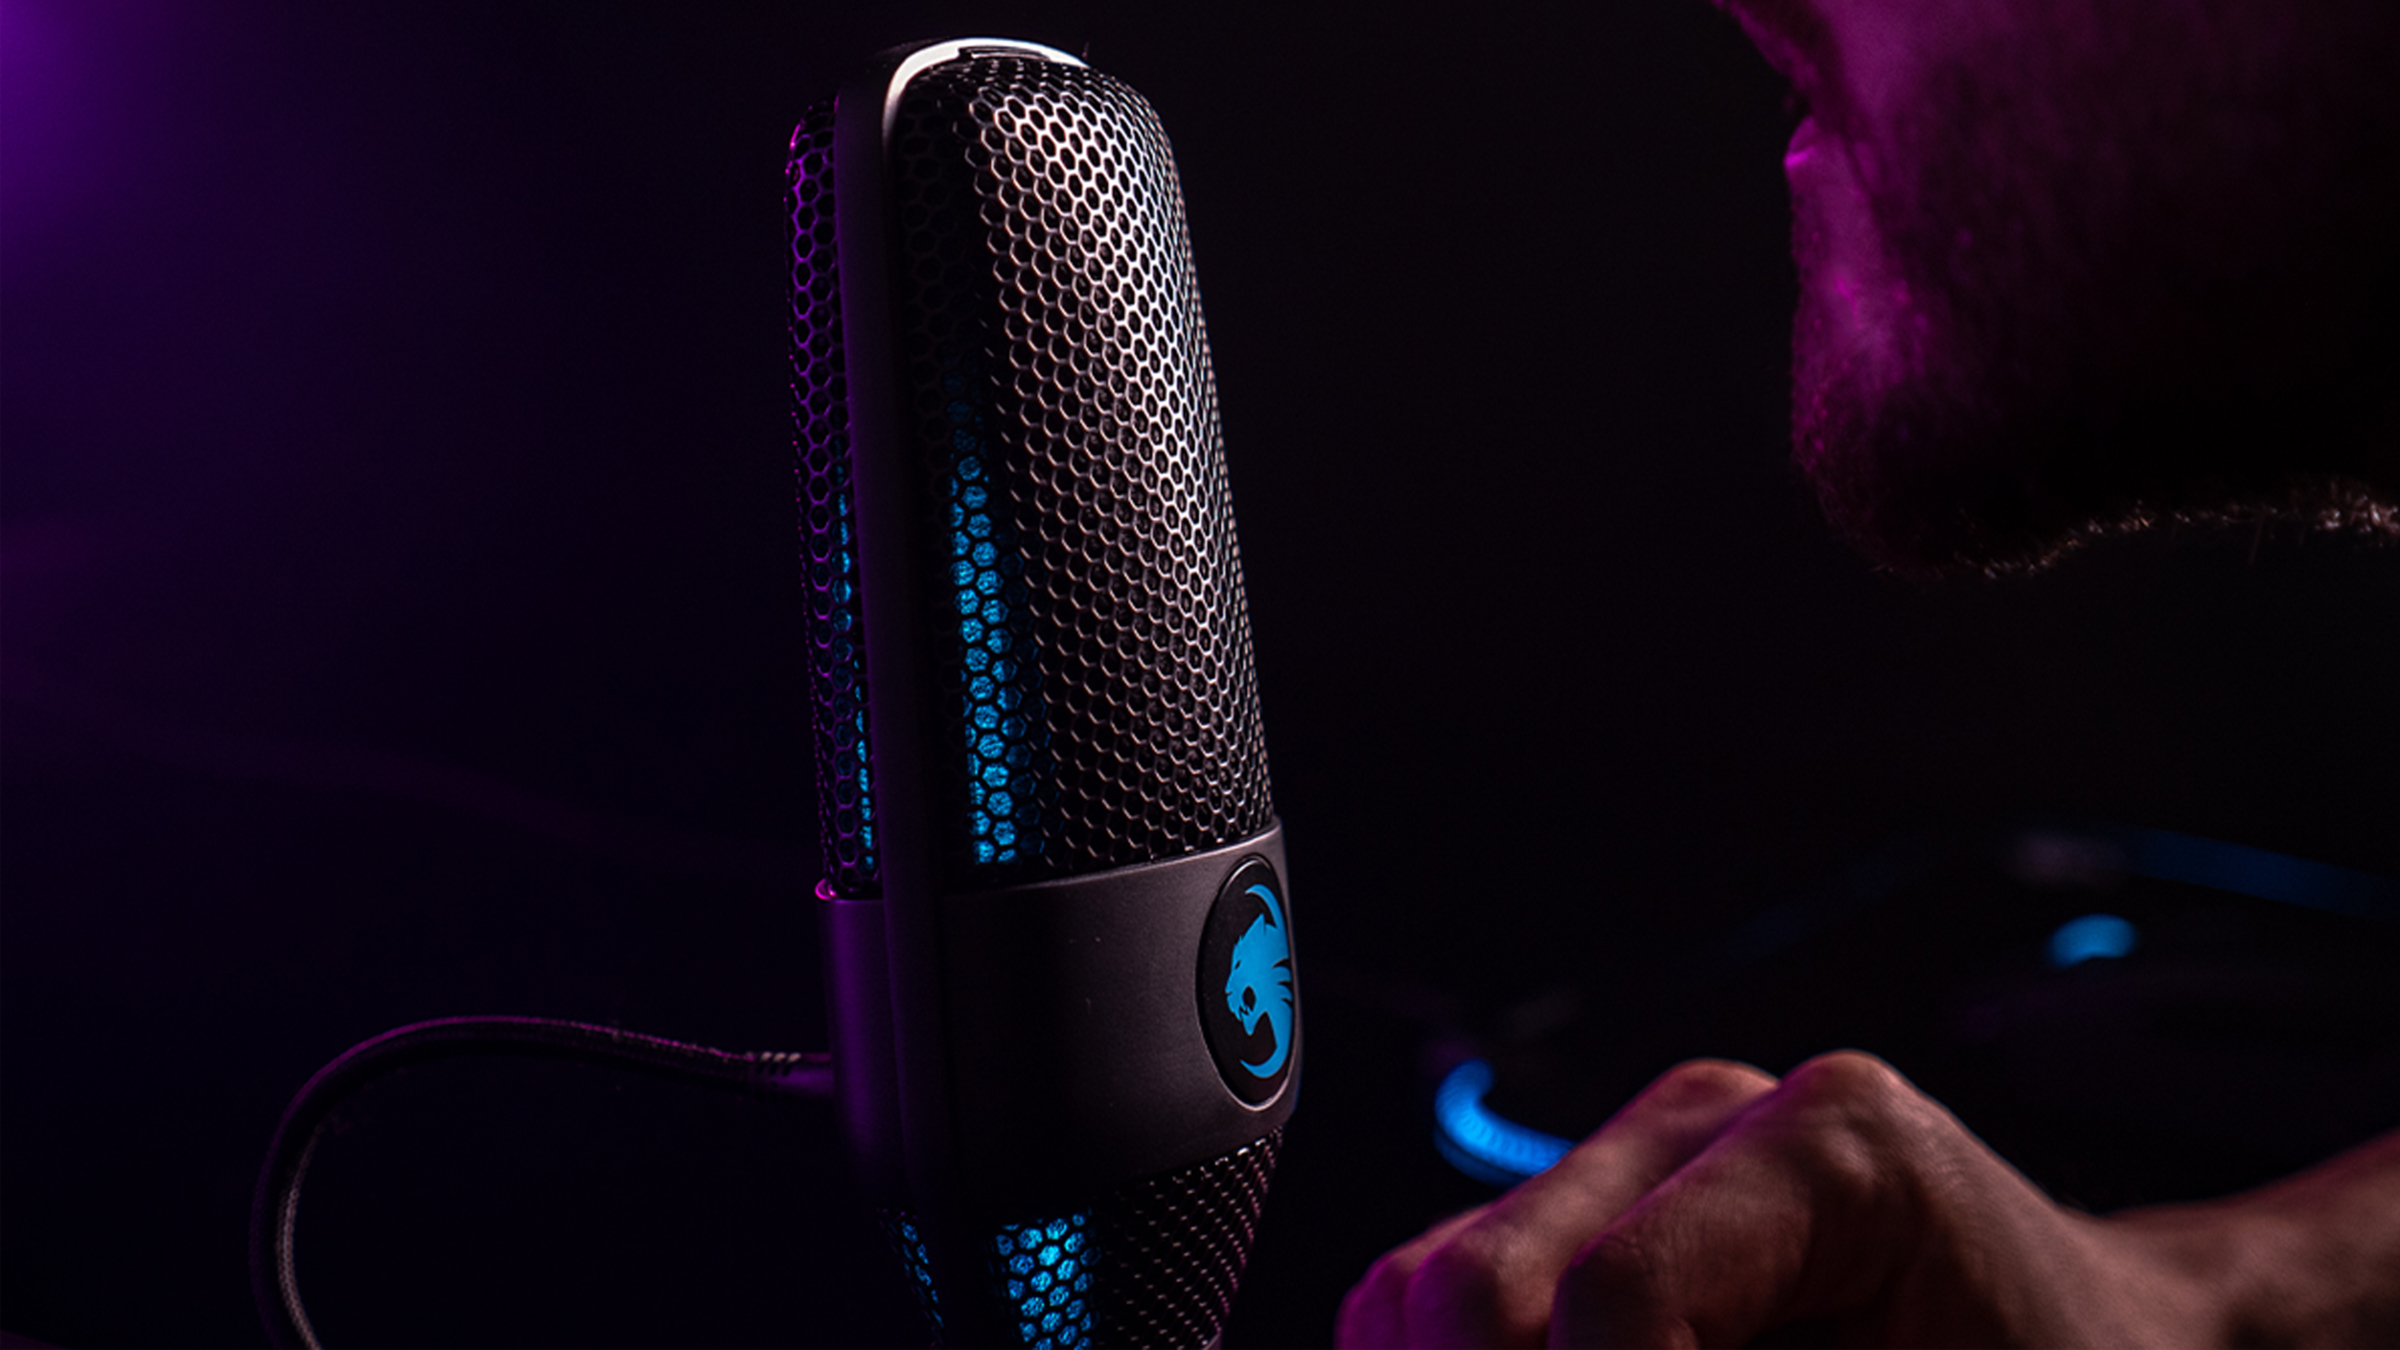 ROCCAT Torch Streaming Mic